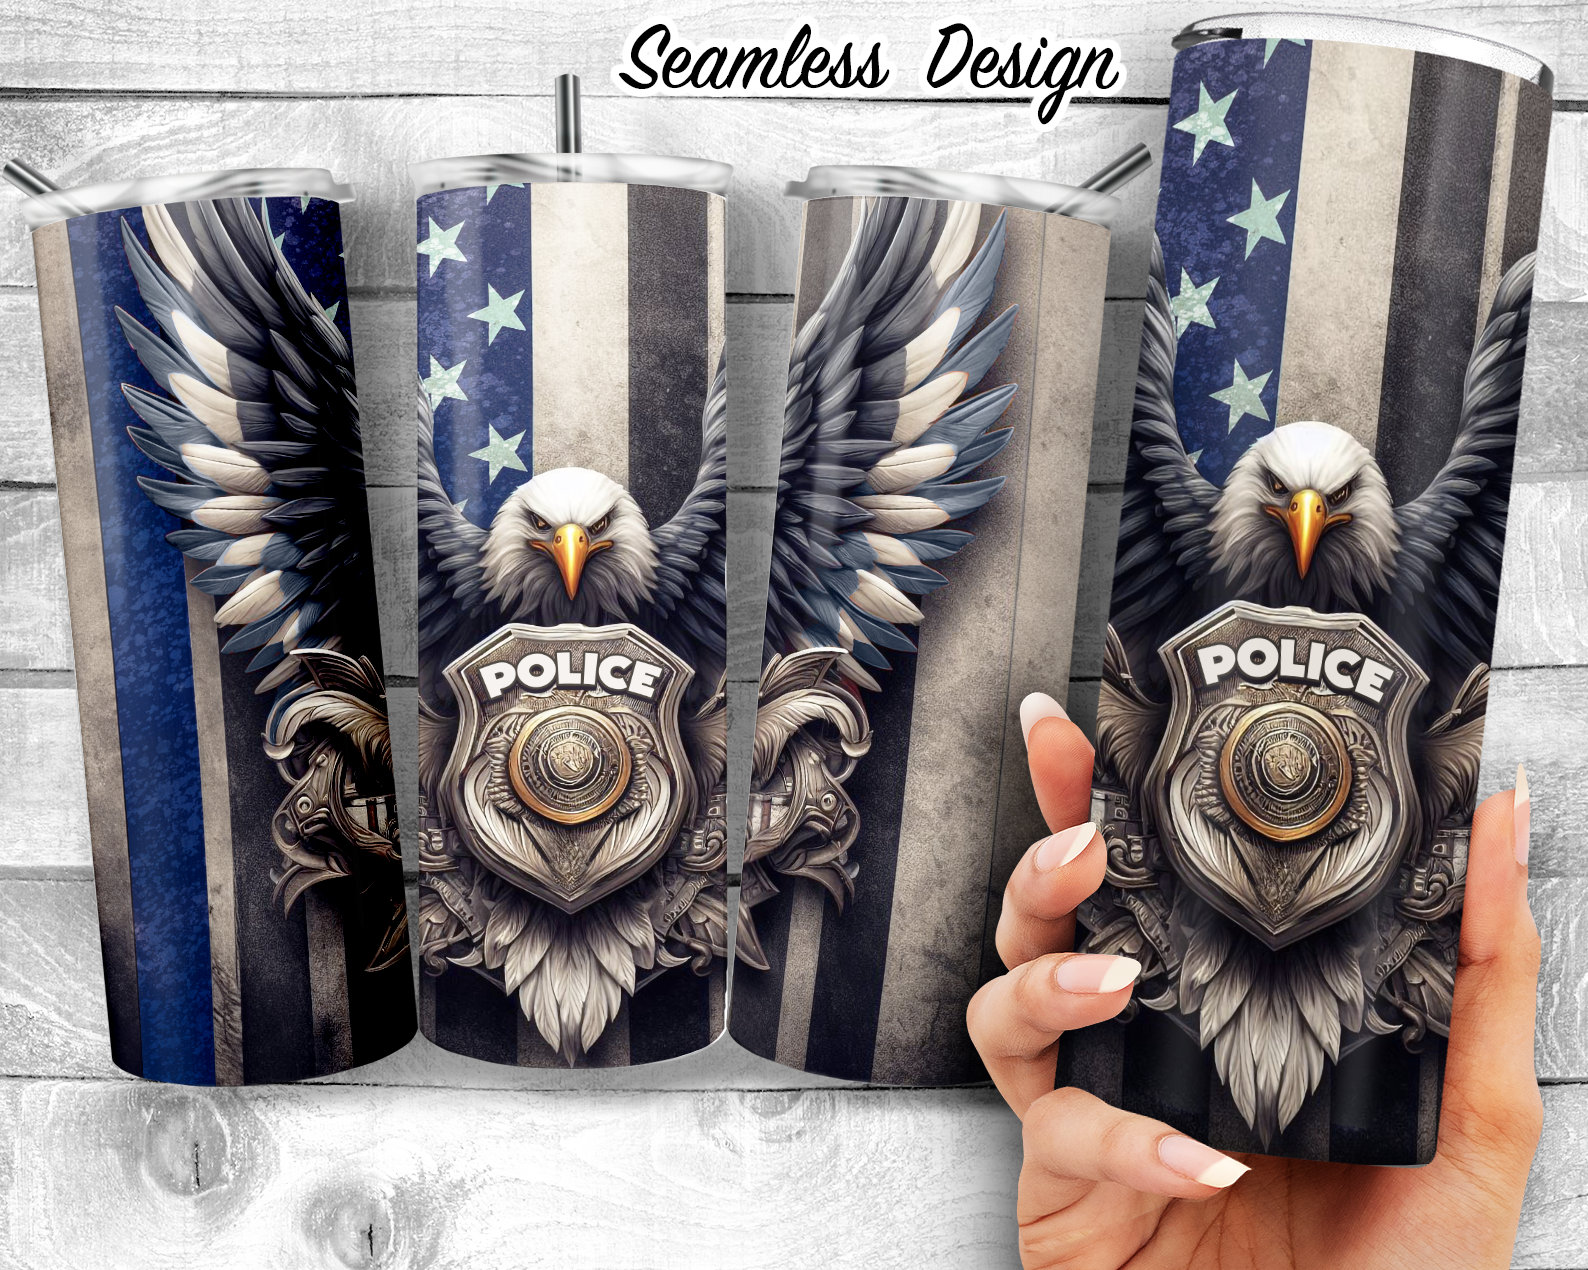 Police Officer Gifts Super Cool Cop Policeman Gift Funny Law